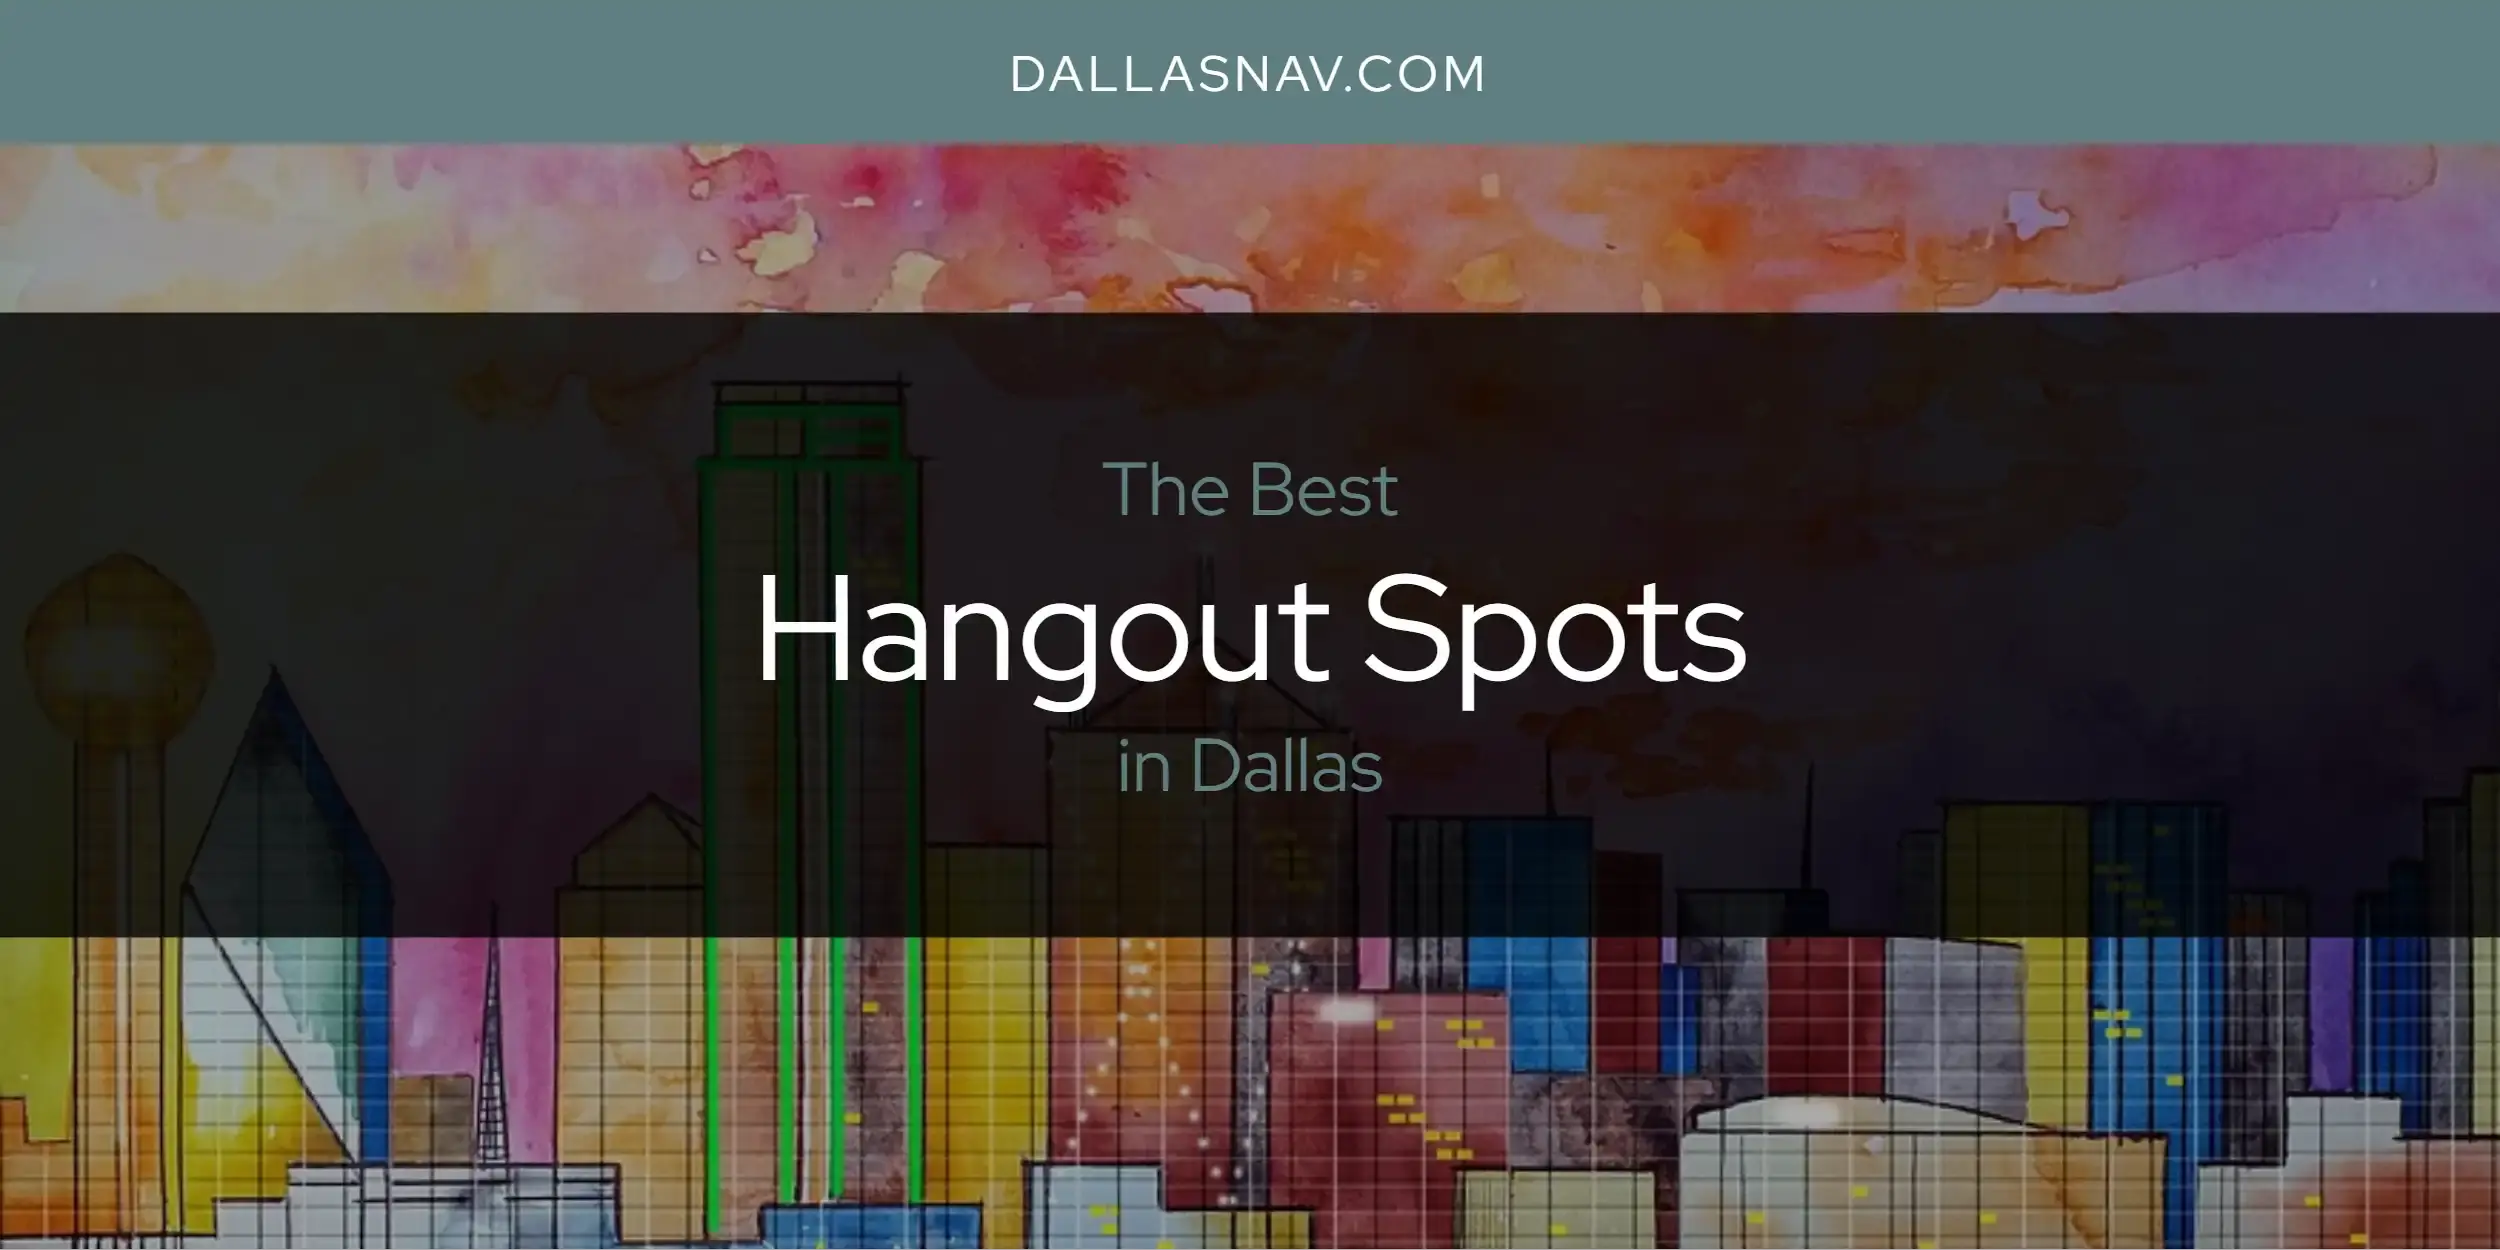 Best Hangout Spots in Dallas? Here's the Top 6